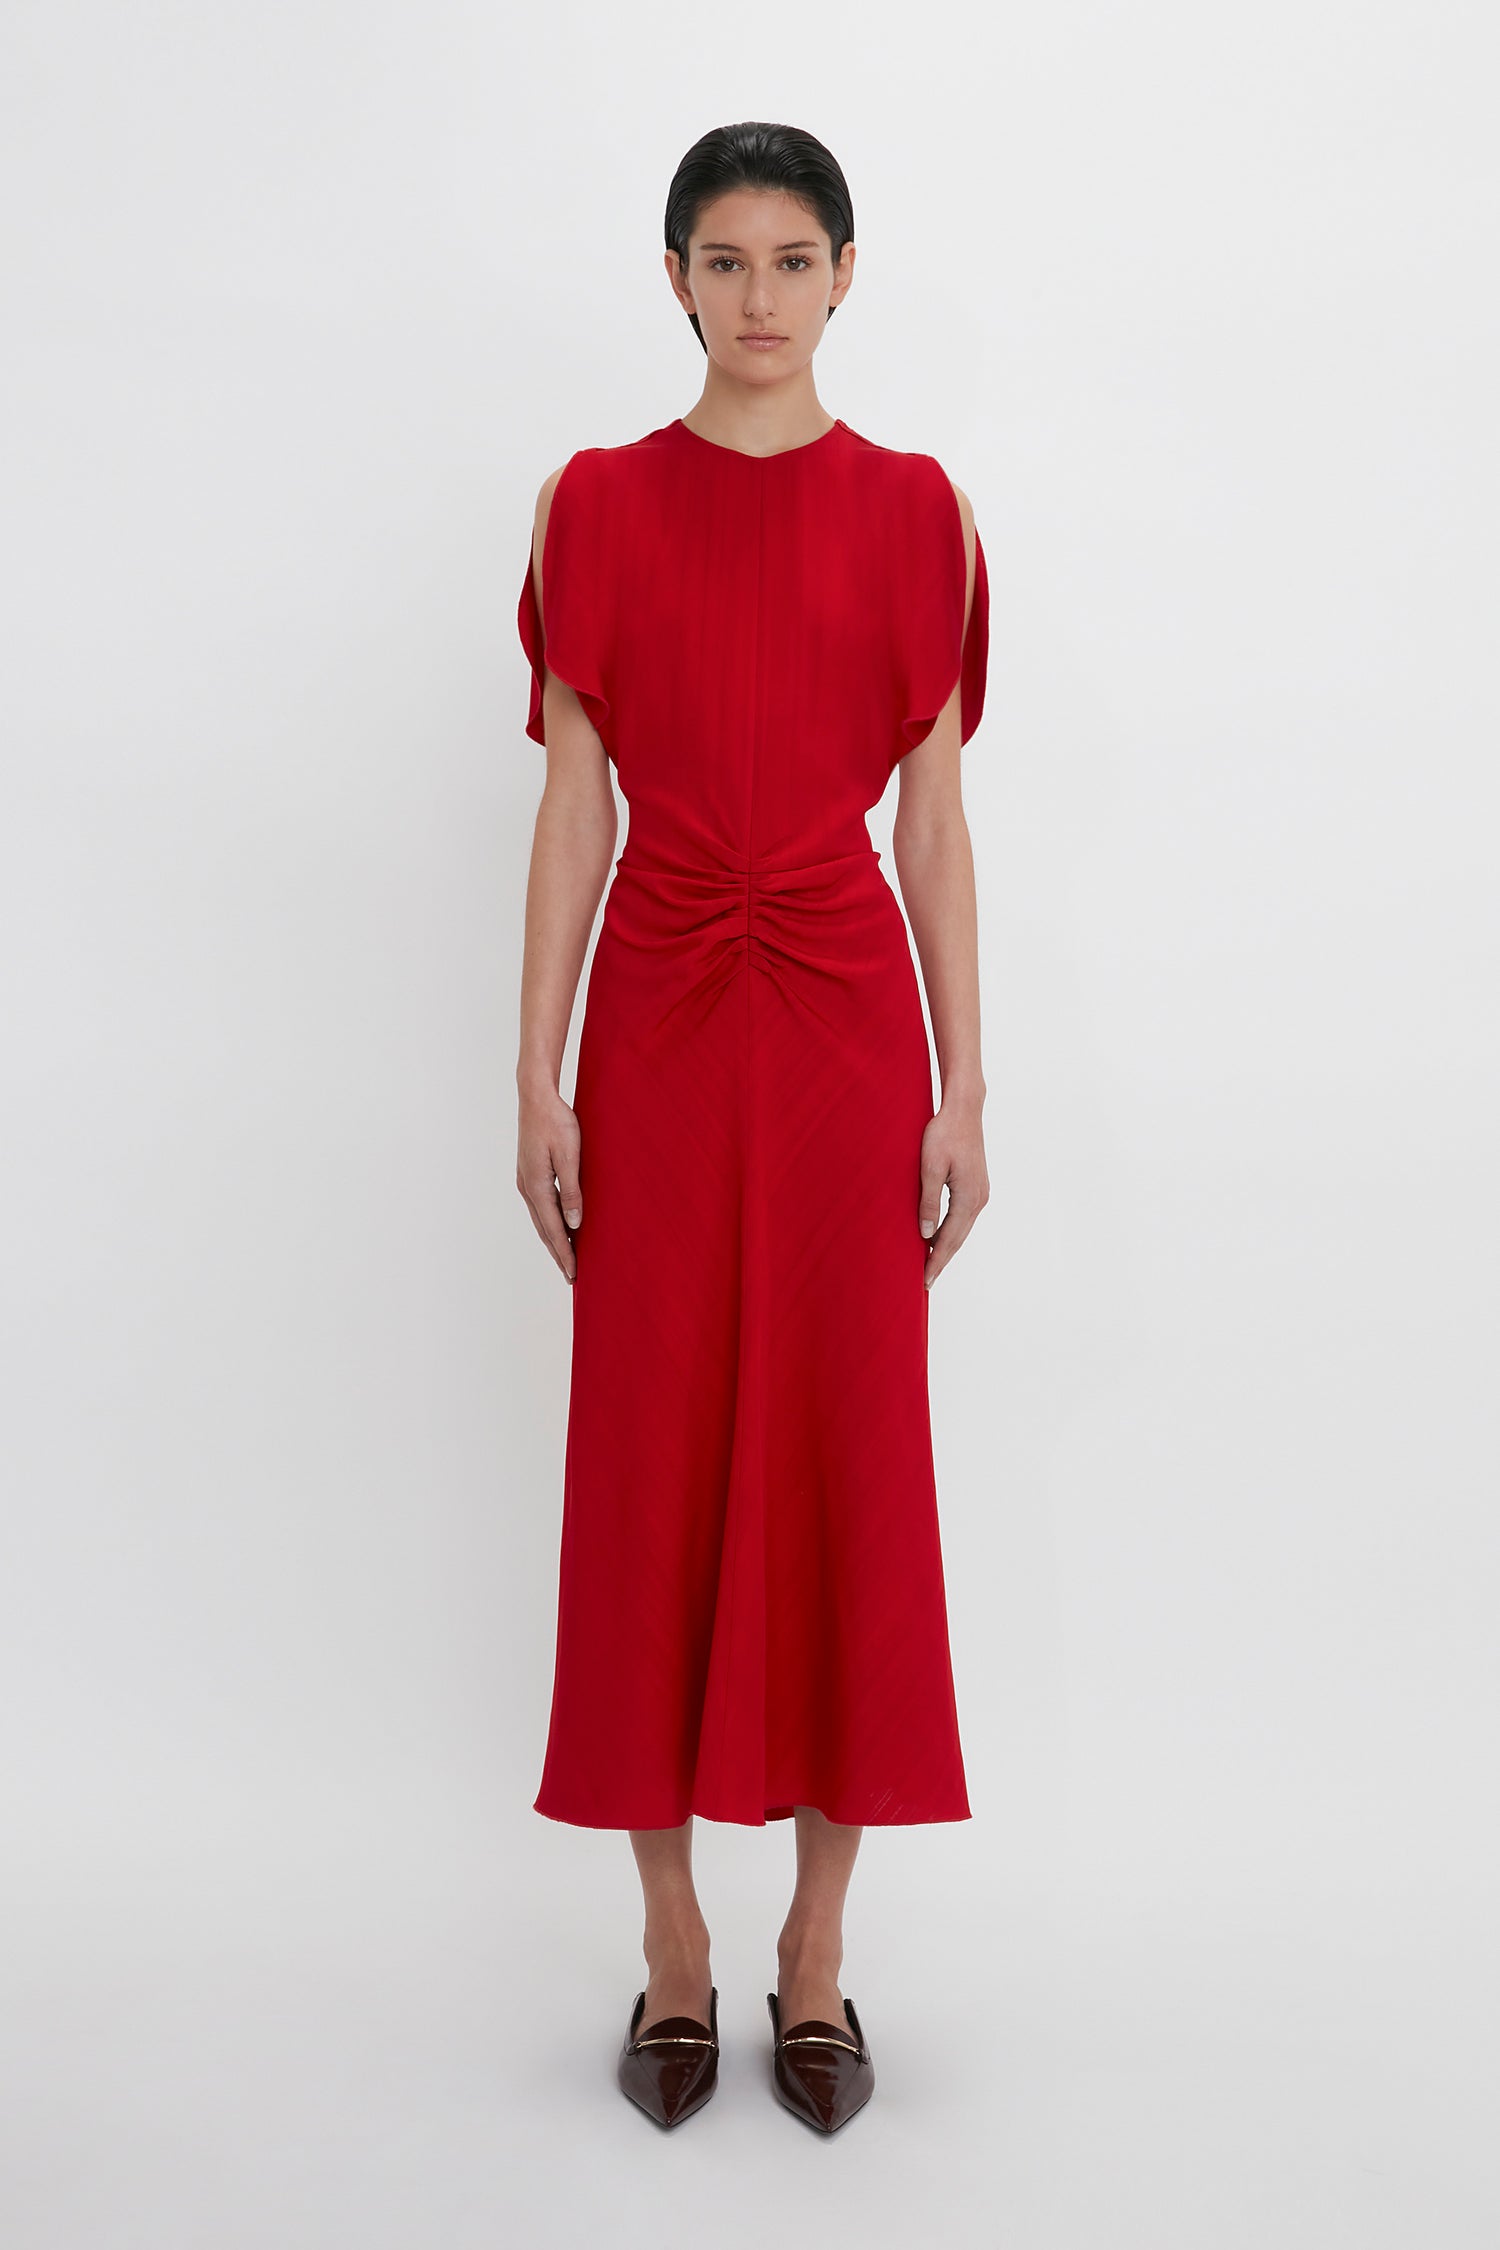 A person stands against a plain background, wearing an Exclusive Gathered Waist Midi Dress In Carmine by Victoria Beckham with open shoulders, along with pointy brown shoes.